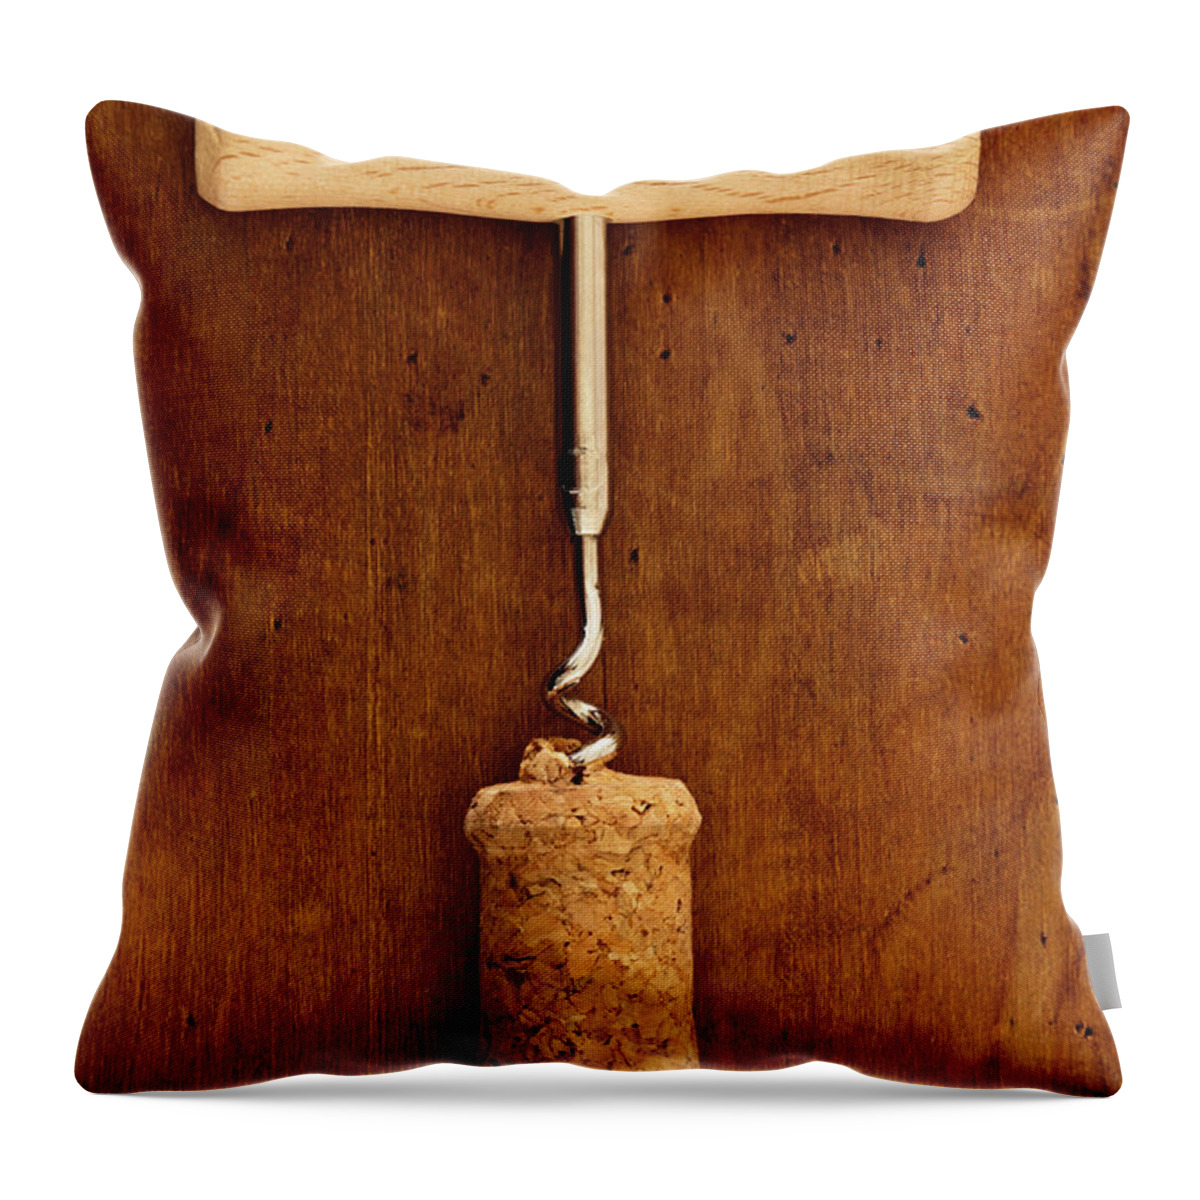 Corkscrew Throw Pillow featuring the photograph Corkscrew In Cork by Larry Washburn